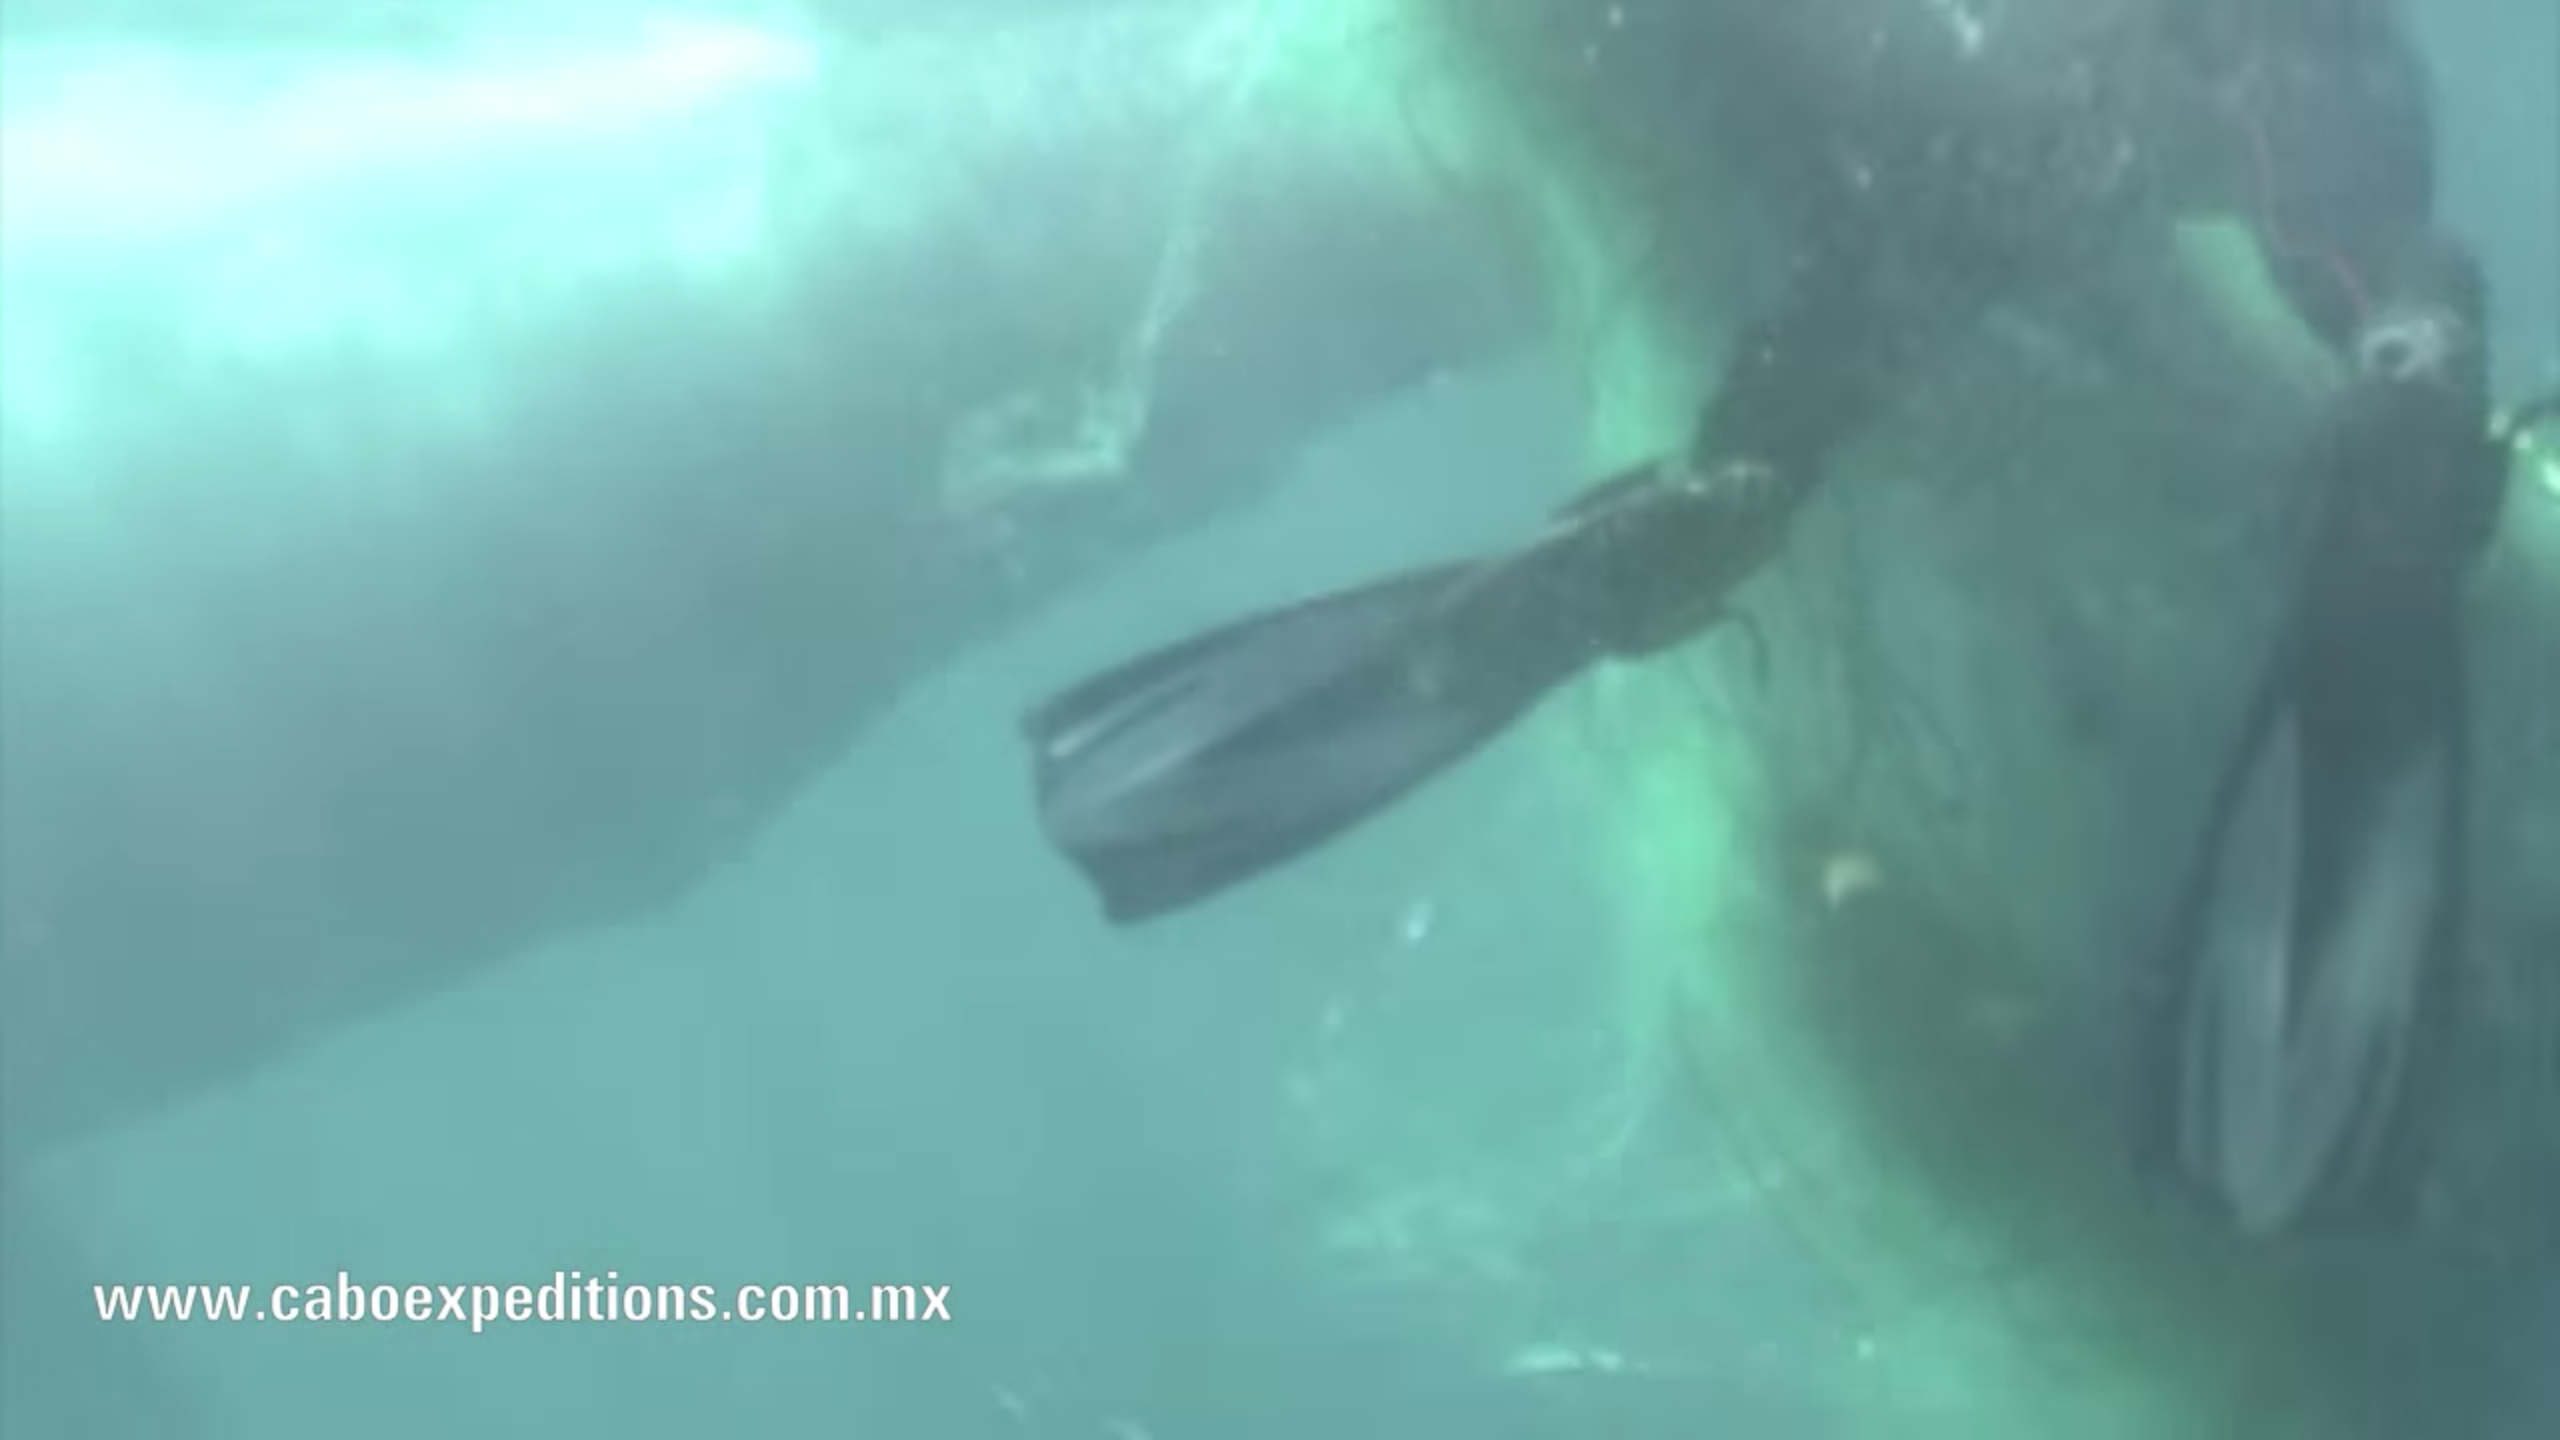 scuba diver cutting net from whale